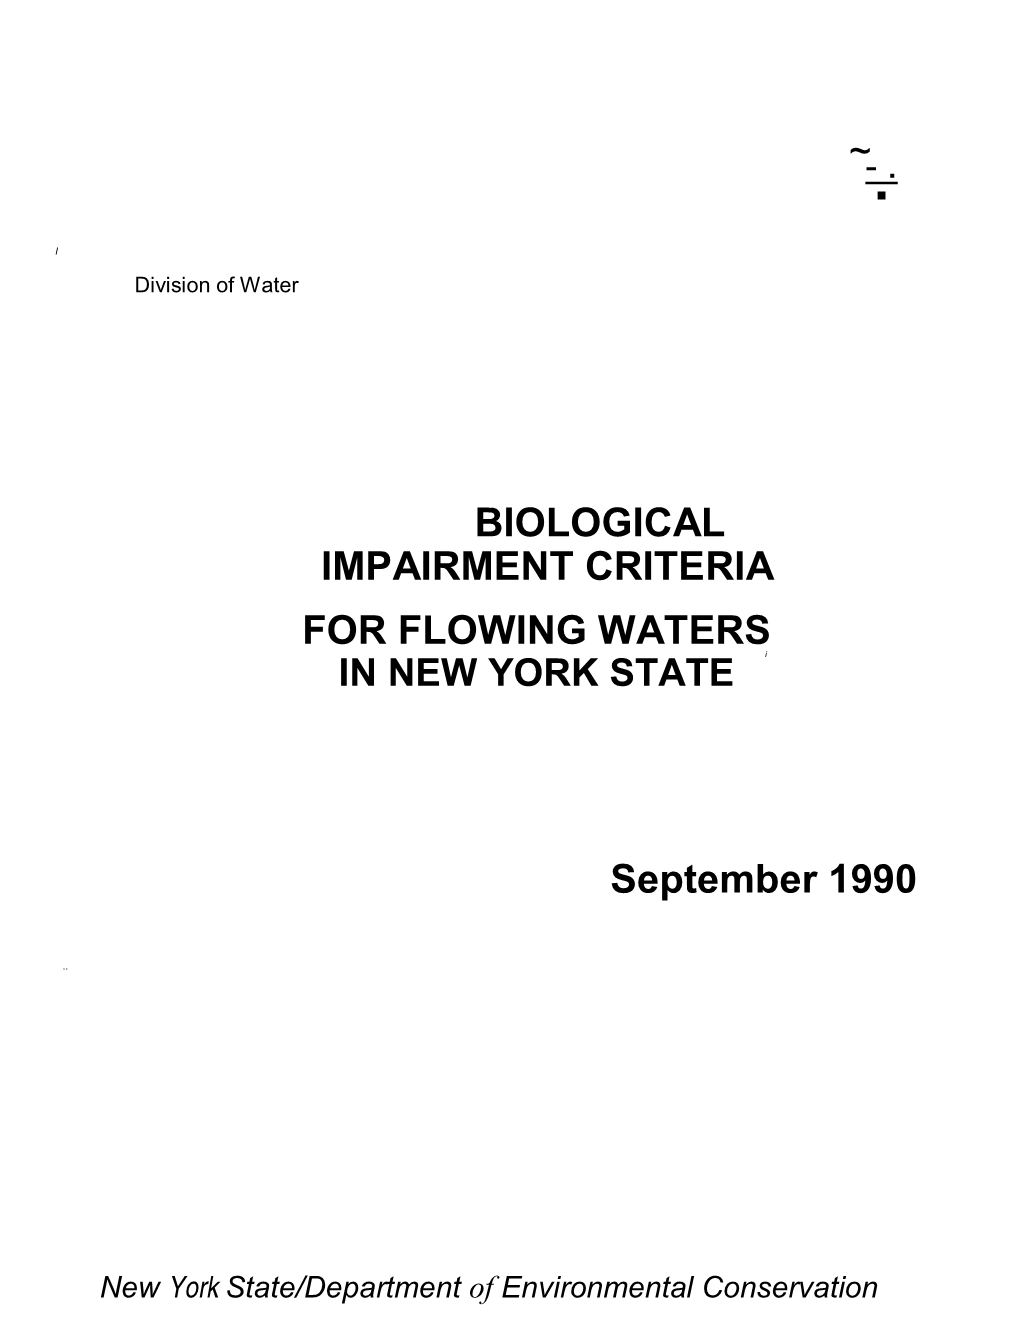 Biological Impairment Criteria for Flowing Waters in New York State